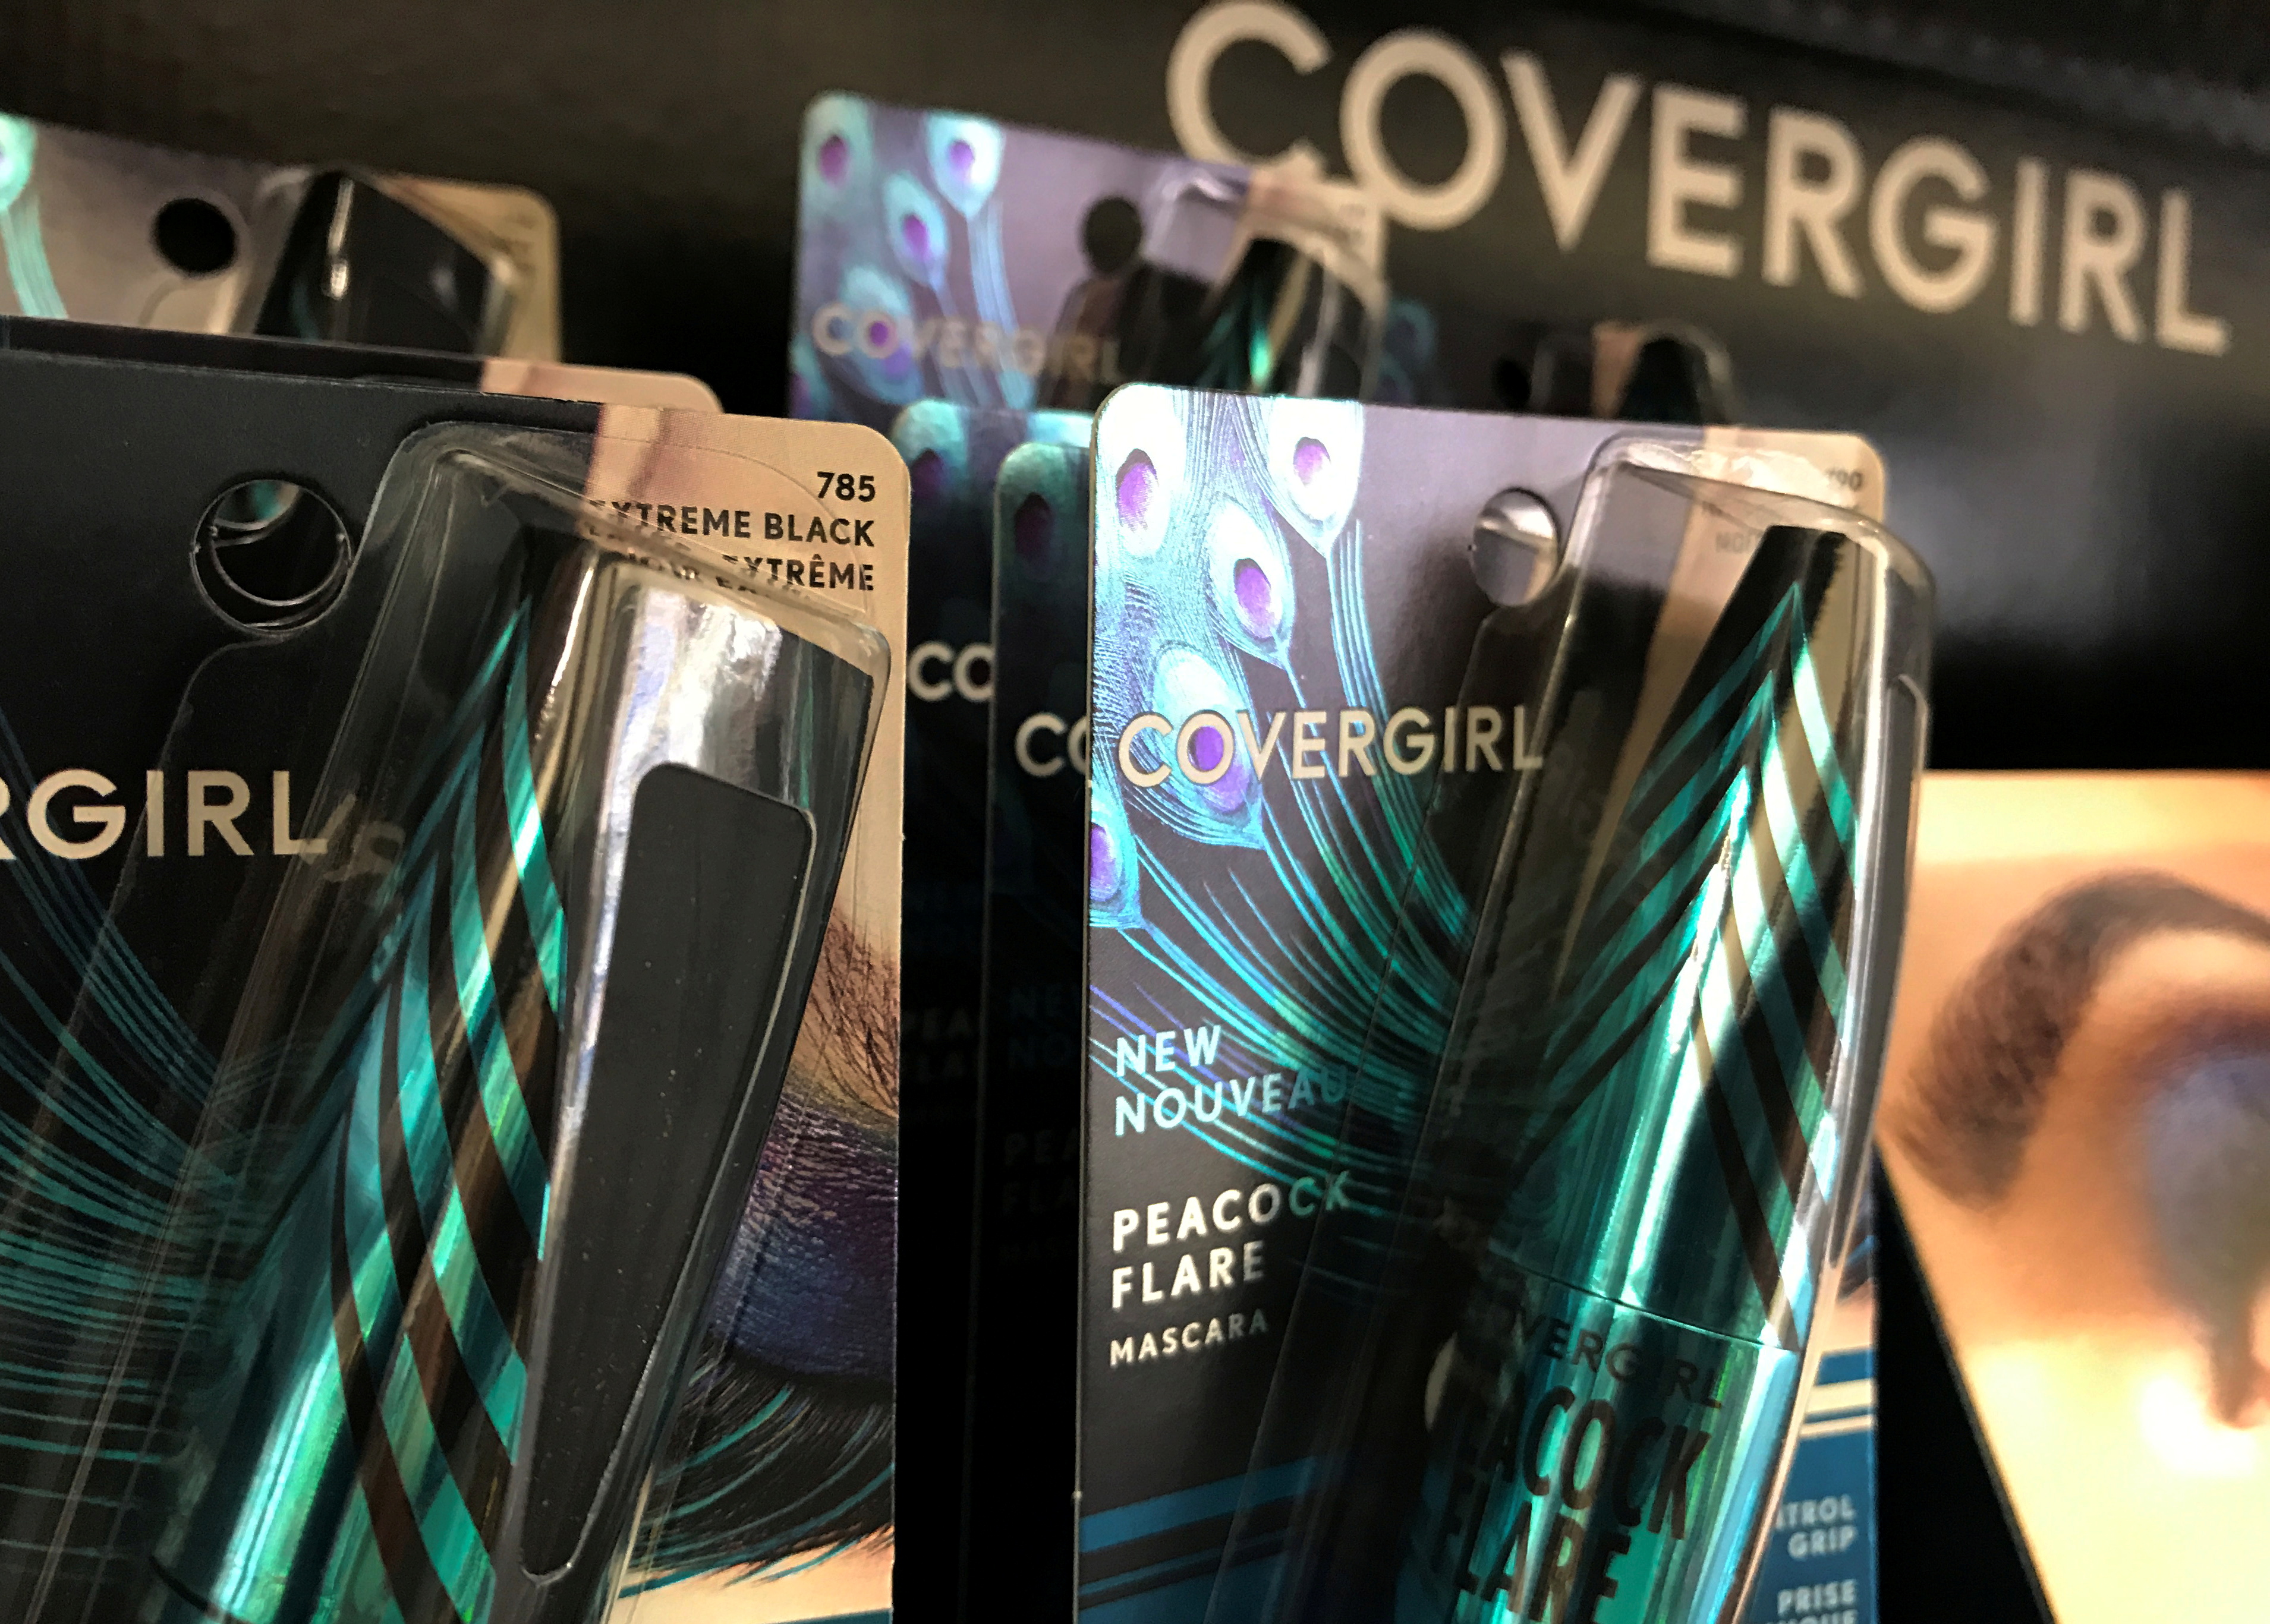 CoverGirl cosmetics owned by Coty Brands are shown for sale in a retail store in Encinitas, California